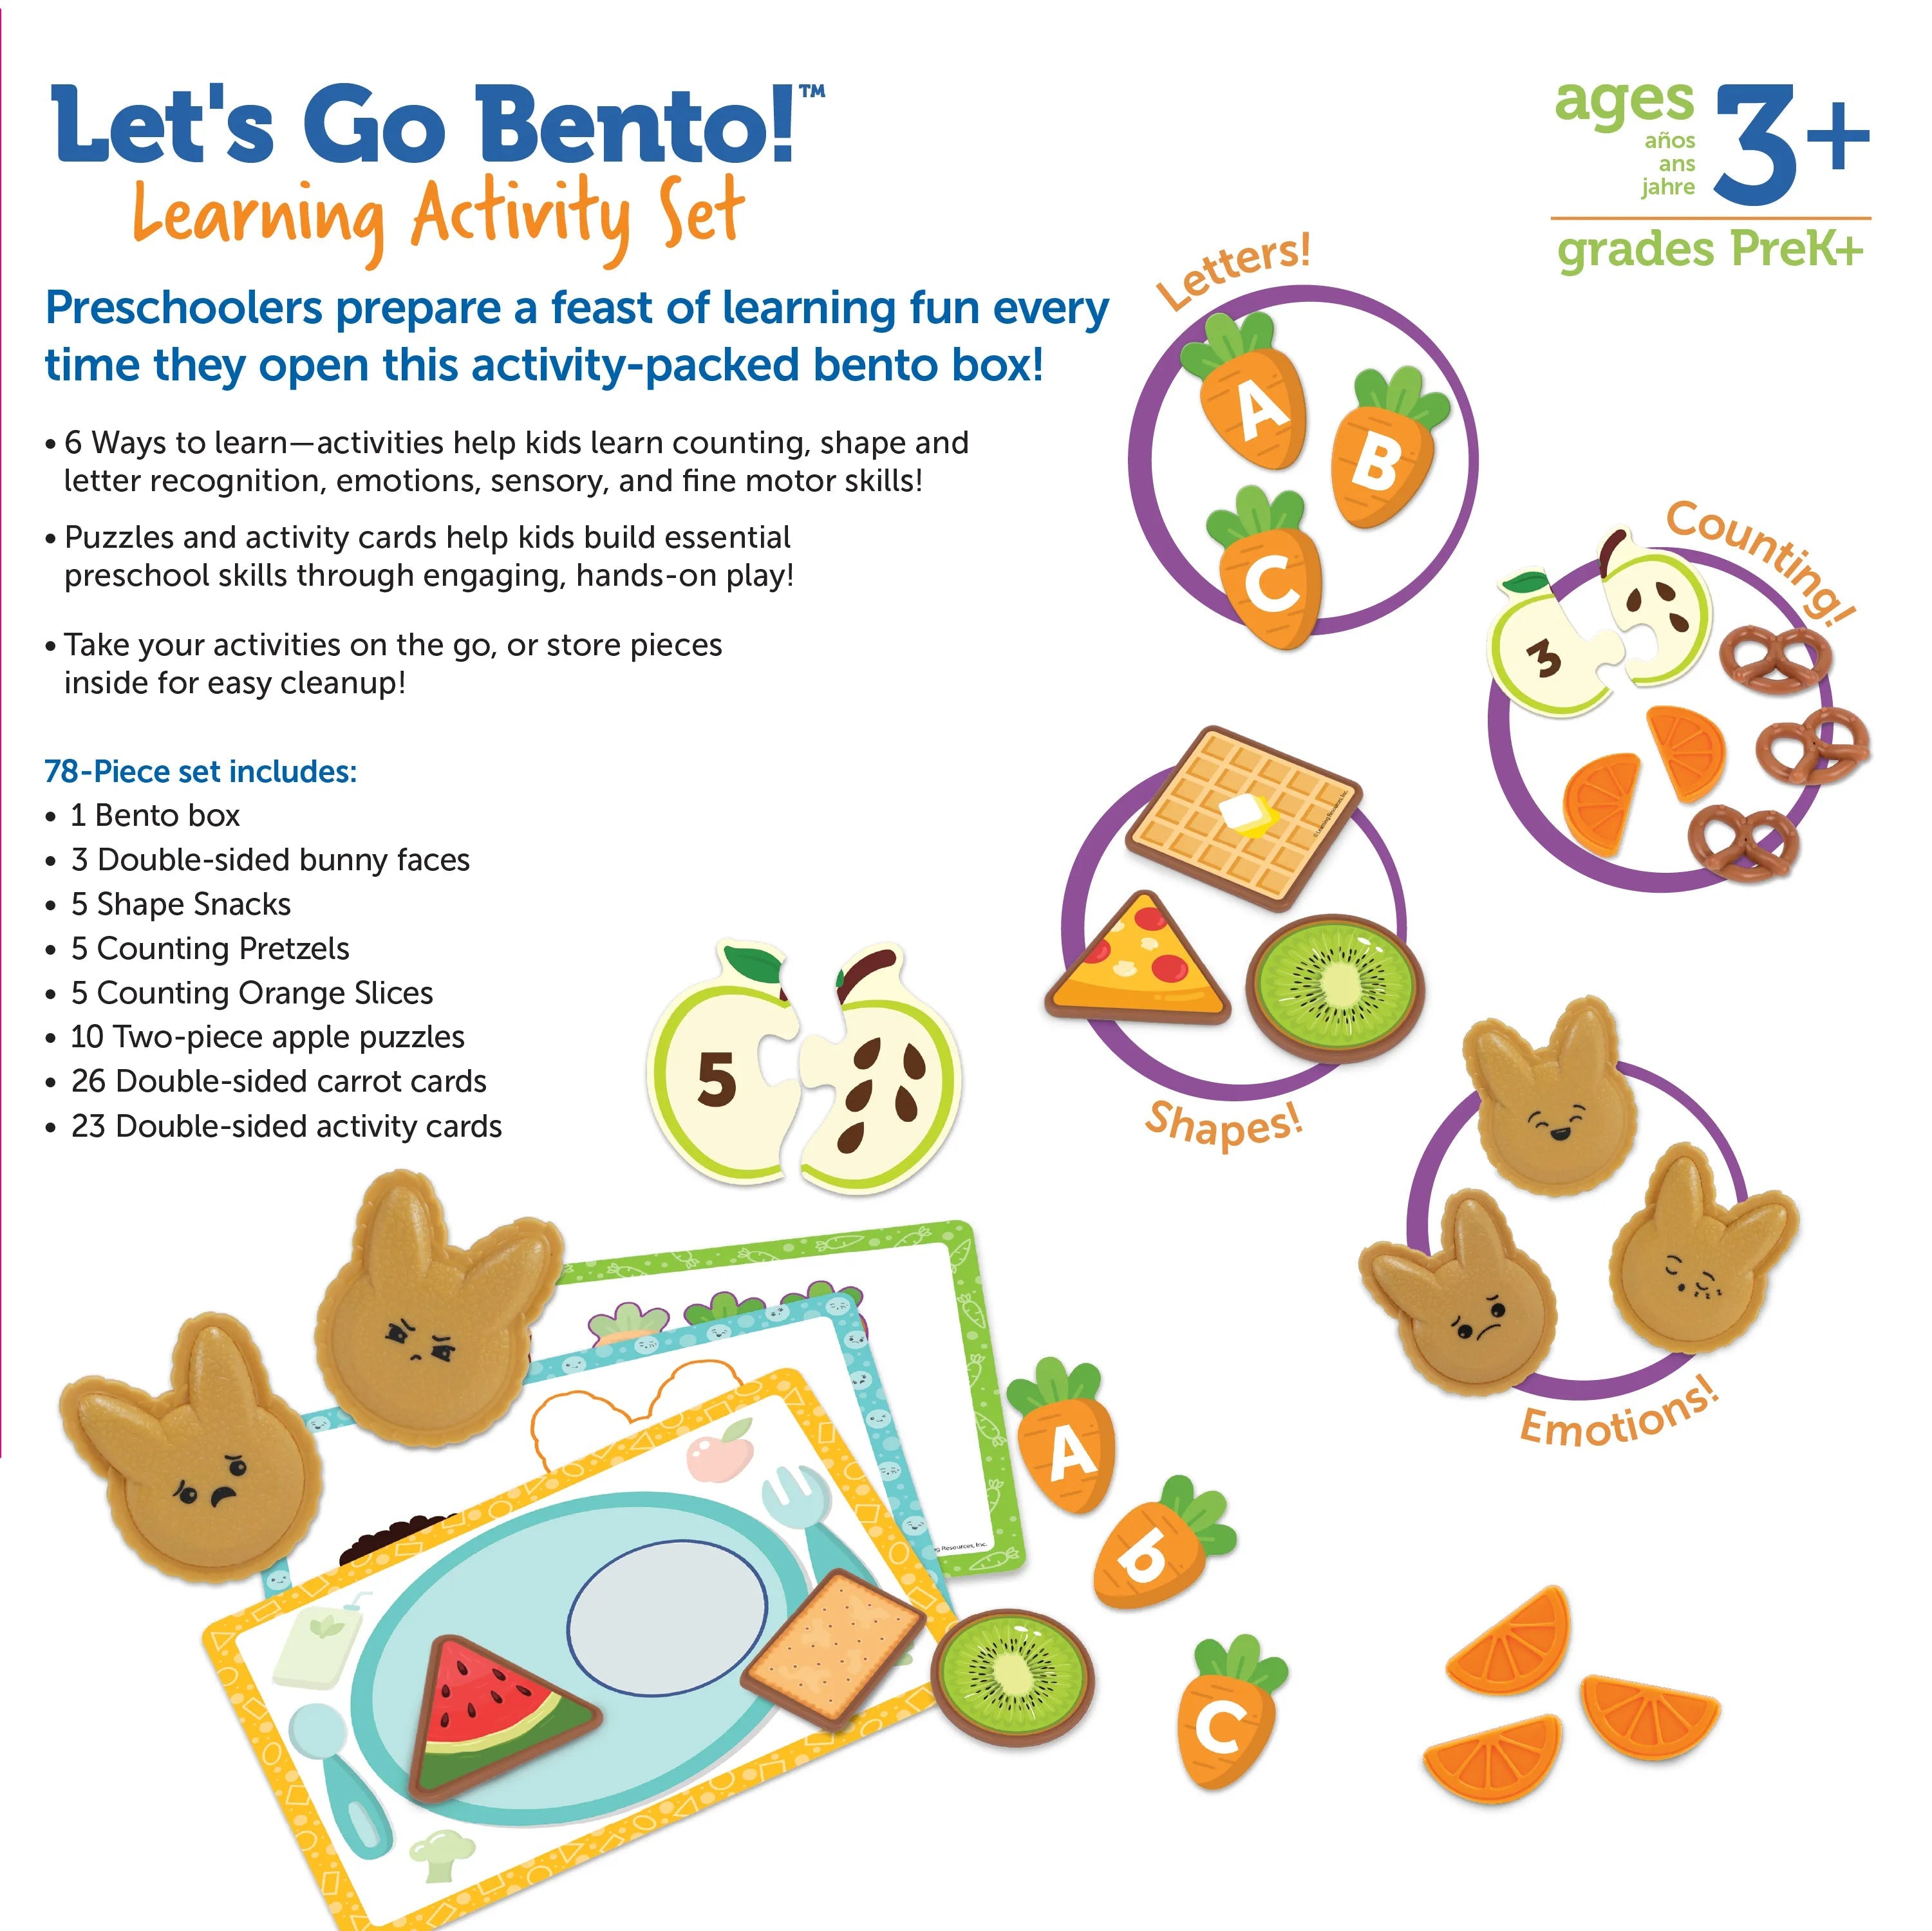 Learning Resources-Let's Go Bento! Learning Activity Set-LER9800-Legacy Toys